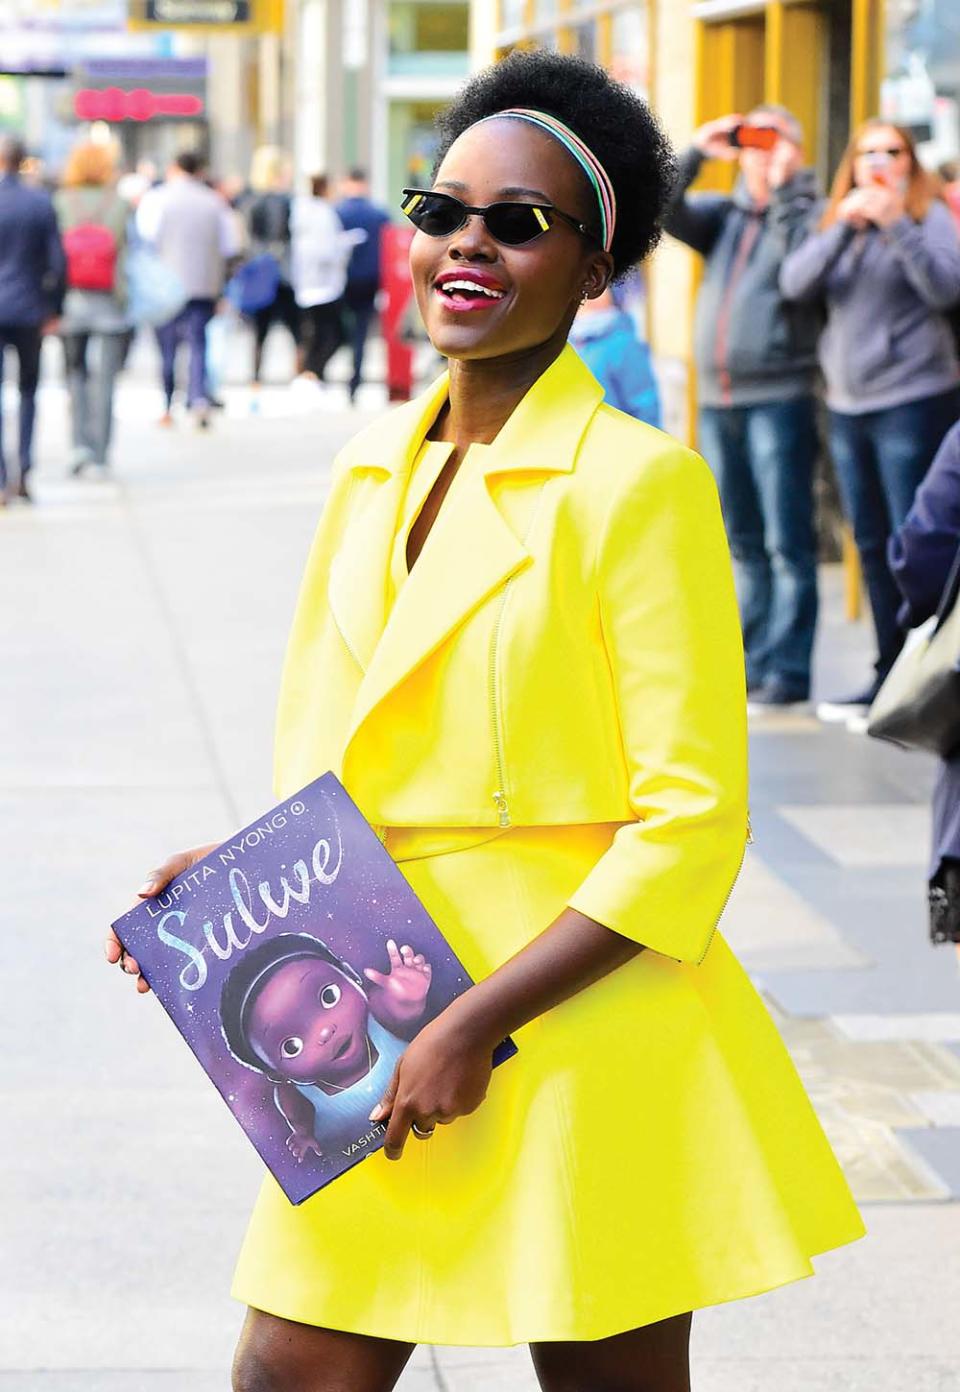 Nyong’o wrote a children’s book in 2019, Sulwe, about a girl who has “skin the color of midnight.” The book became a New York Times best-seller and won an NAACP Image Award.